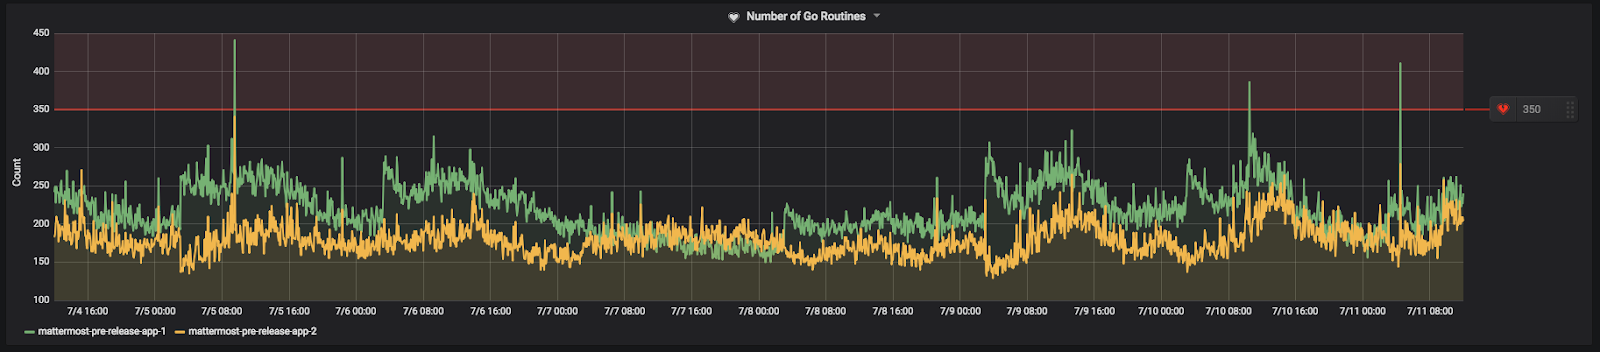 Example Goroutines metrics for the Mattermost Community Server, where the threshold is configured above the average number of Goroutines observed during peak load times.